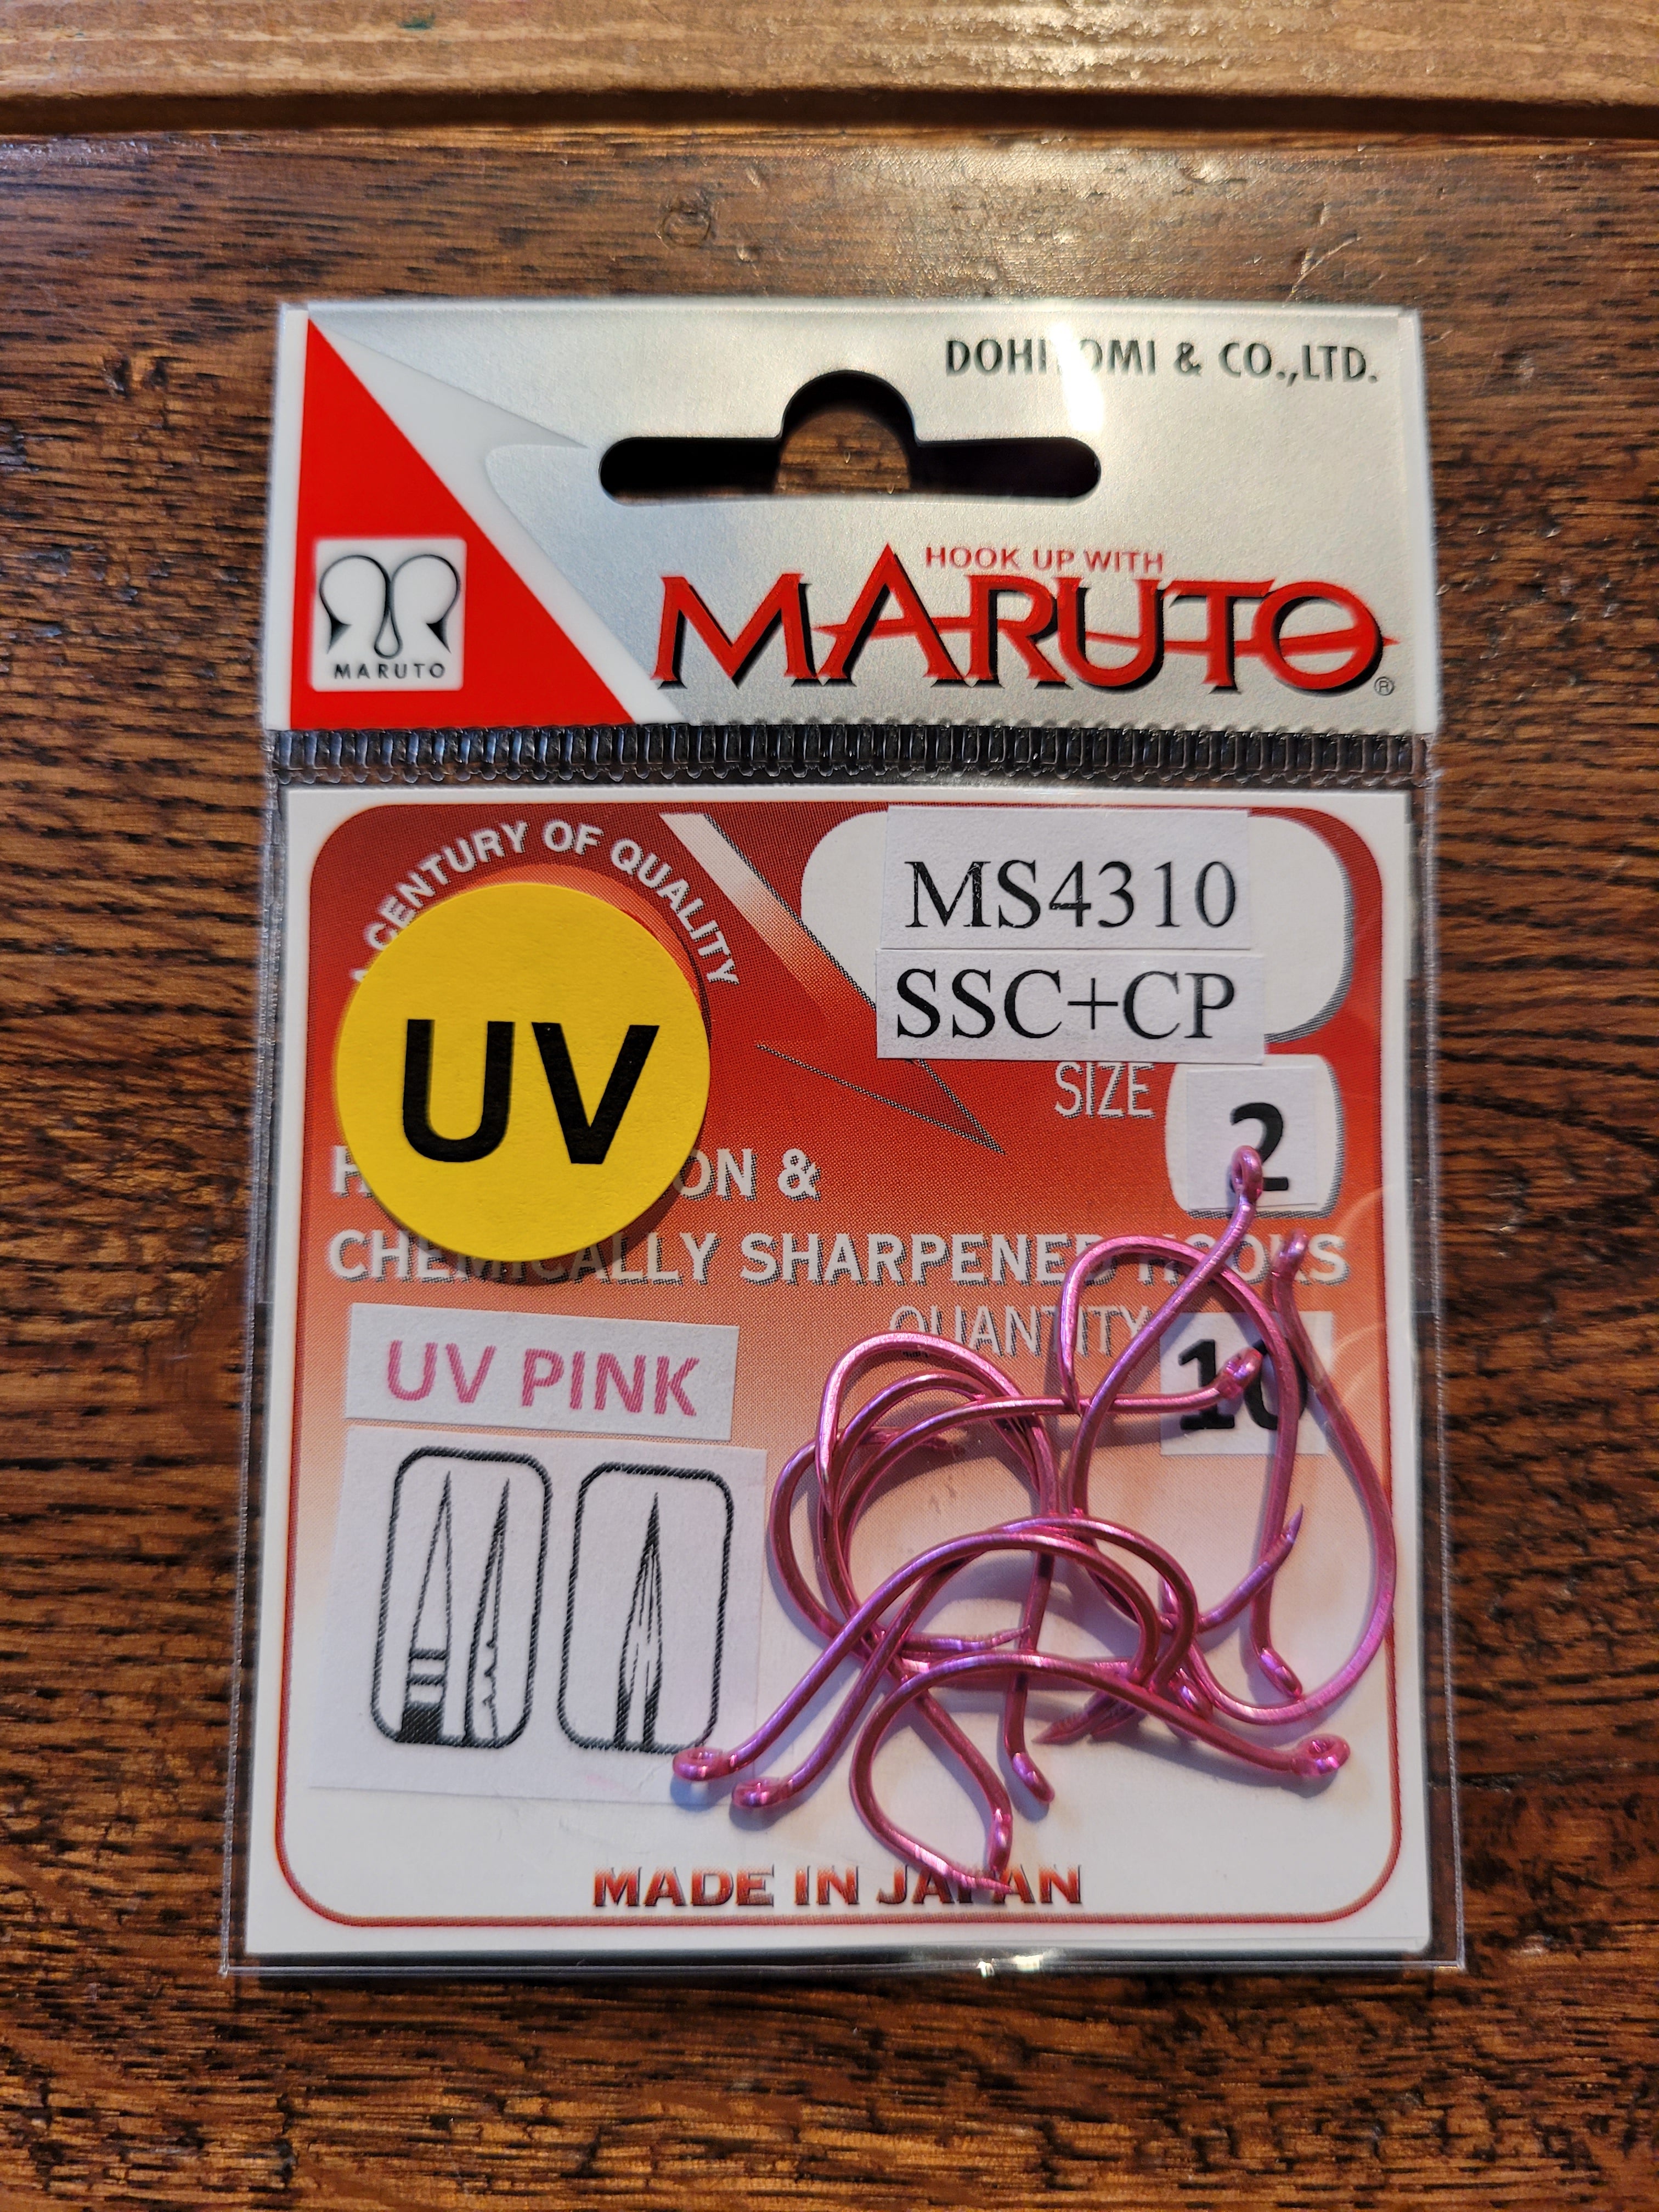 MARUTO 8832SSC+CP BARBLESS SICKLE HOOKS 2